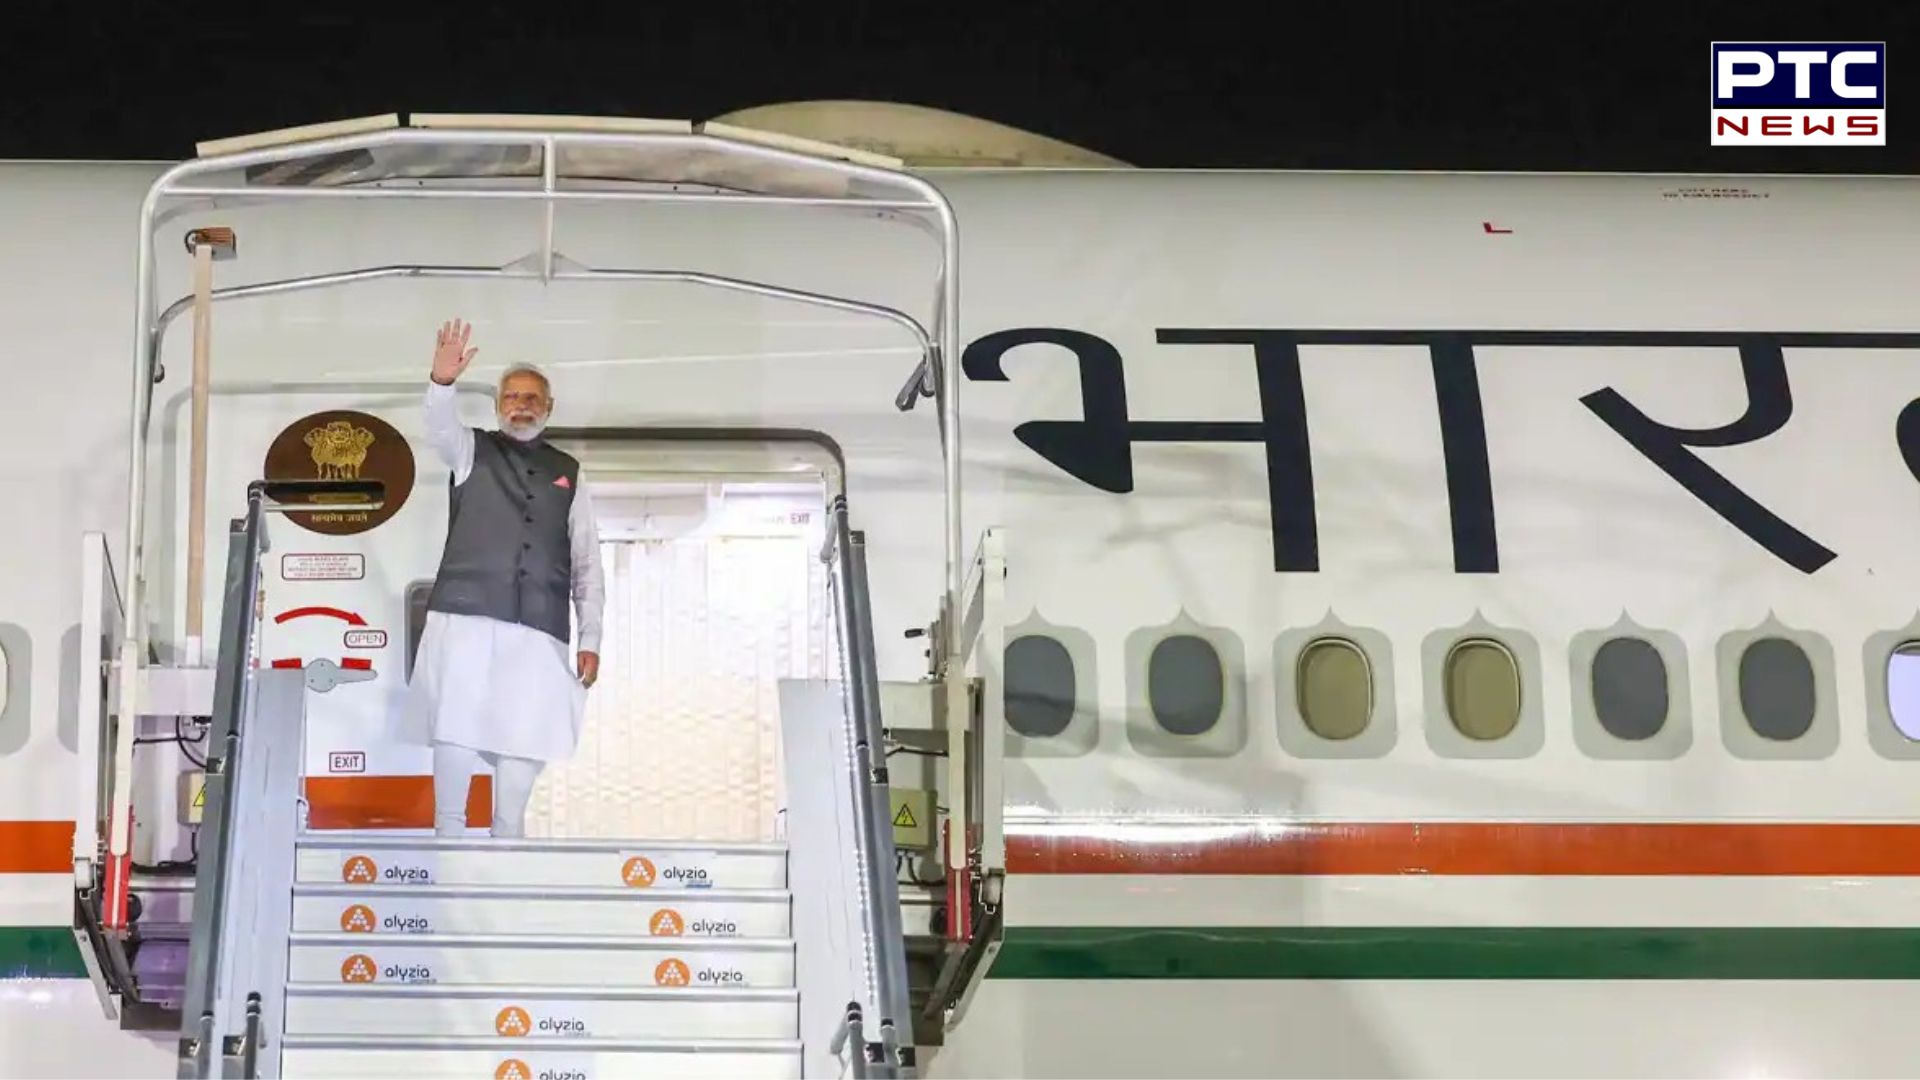 Amid farmers' protest in India, Prime Minister Modi embarks on UAE visit